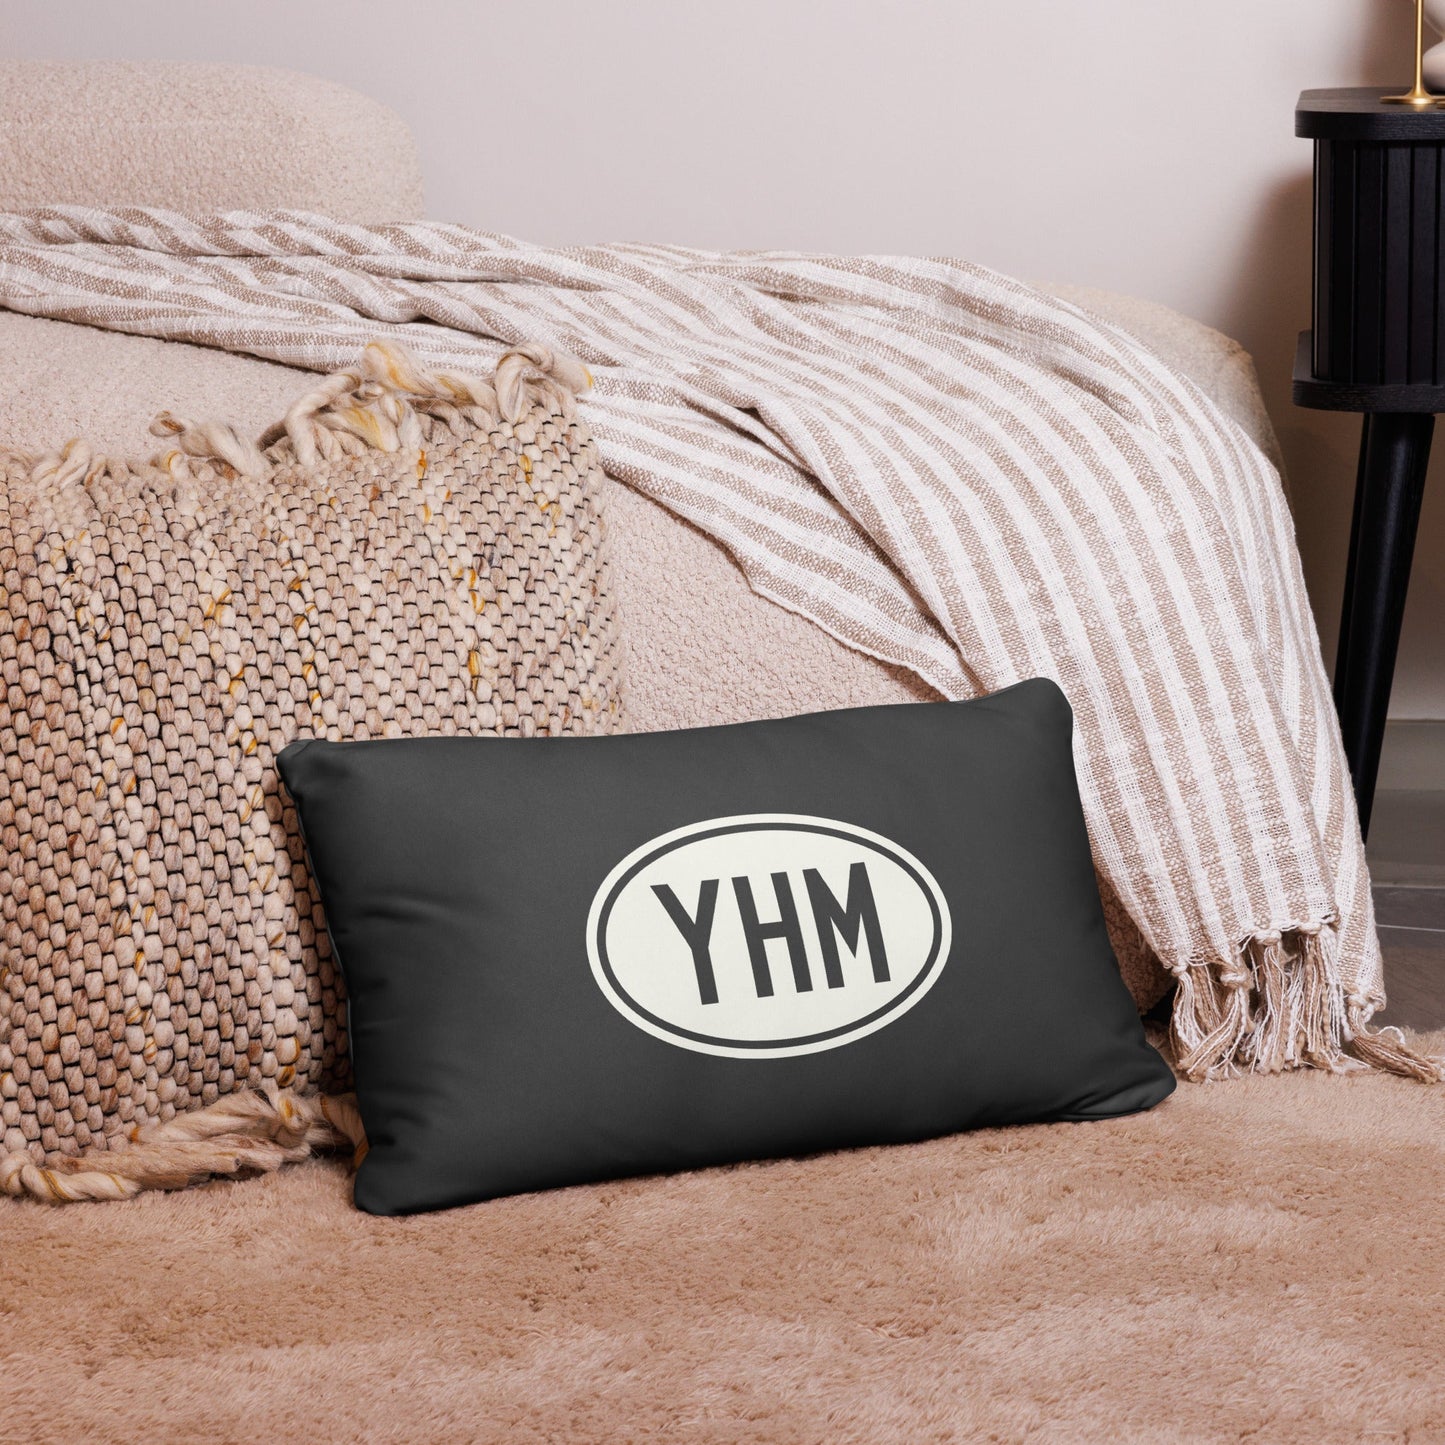 Unique Travel Gift Throw Pillow - White Oval • YQM Moncton • YHM Designs - Image 05